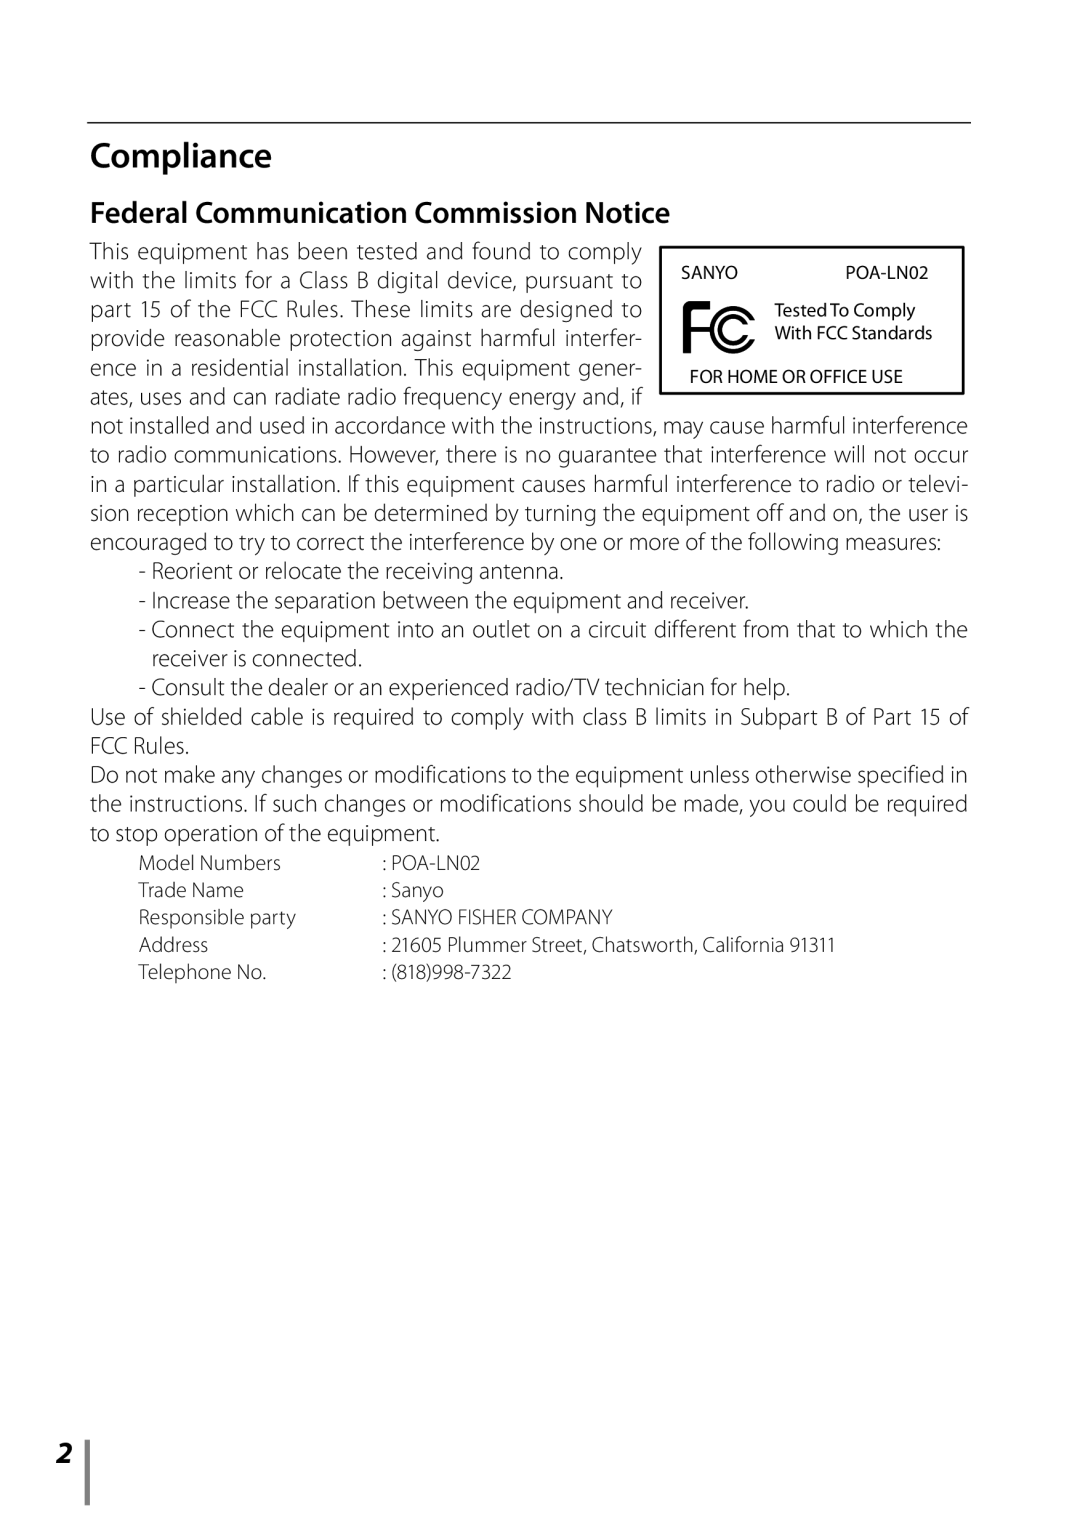 Sanyo POA-LN02 owner manual Compliance, Federal Communication Commission Notice 